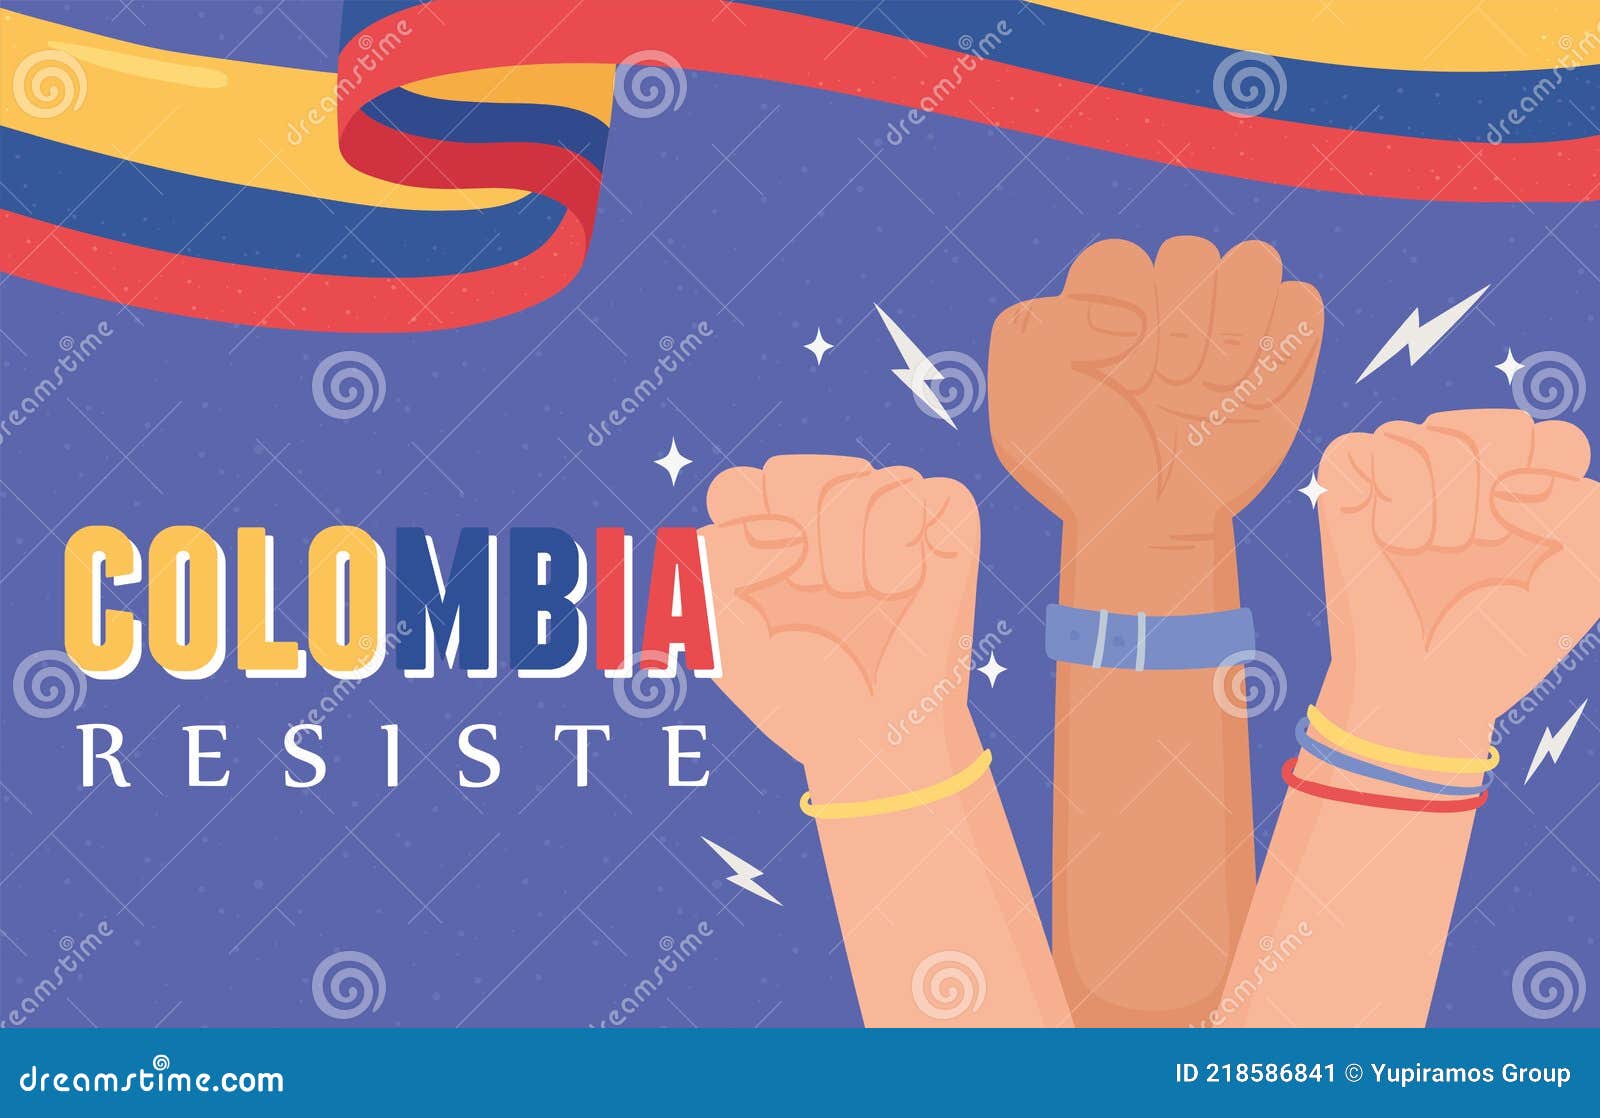 colombia resists protest